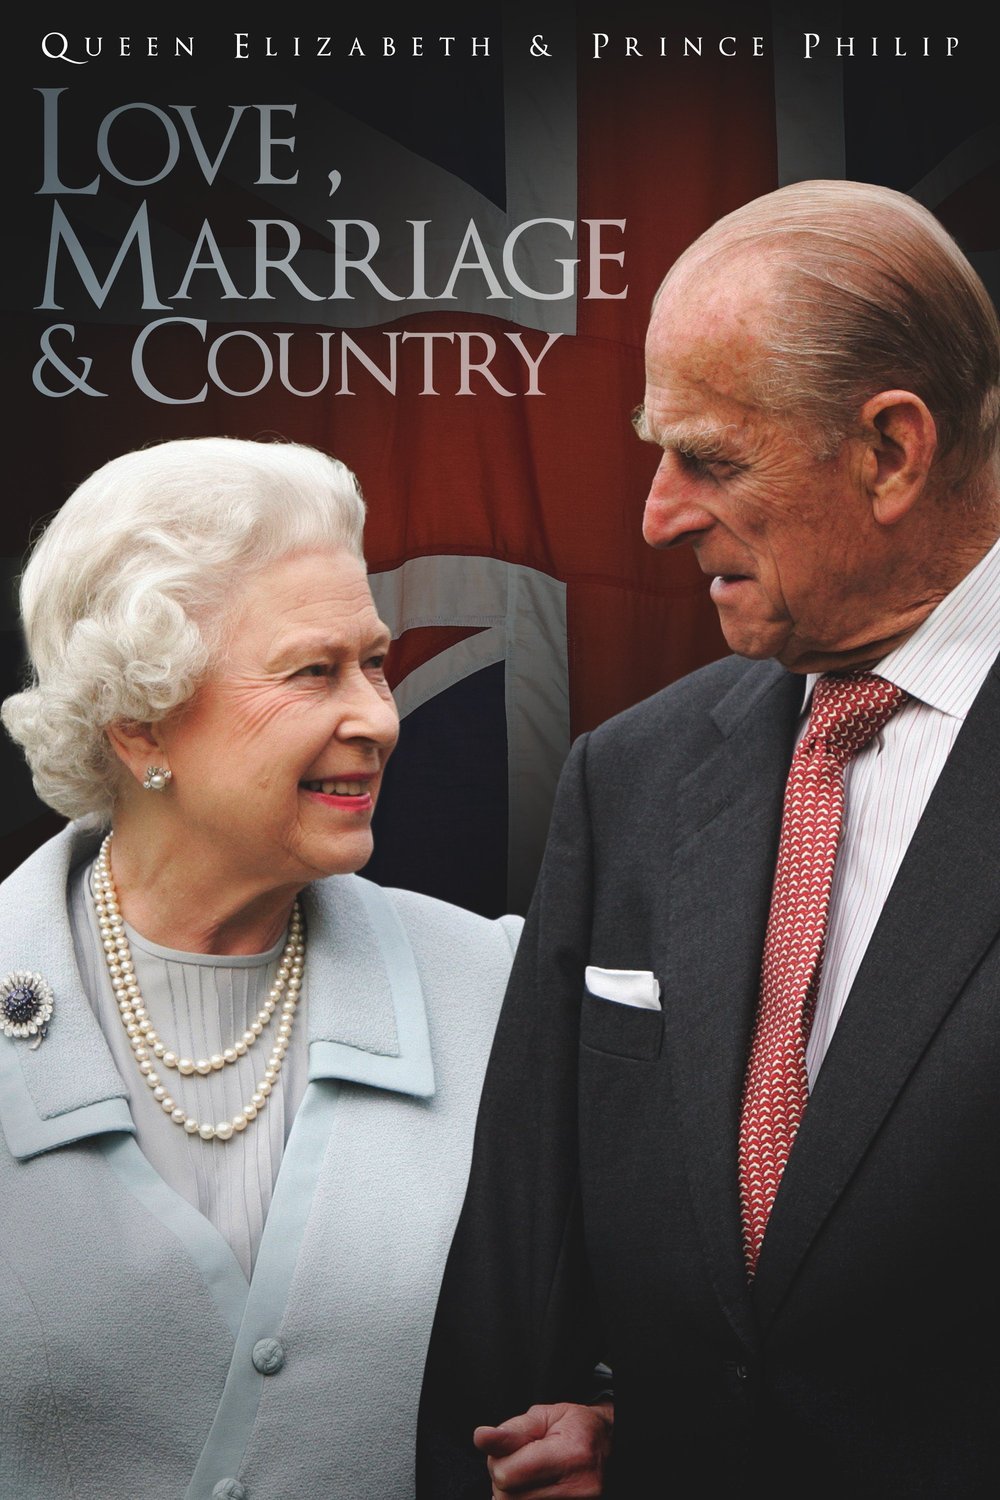 Poster of the movie Queen Elizabeth & Prince Philip: Love, Marriage & Country